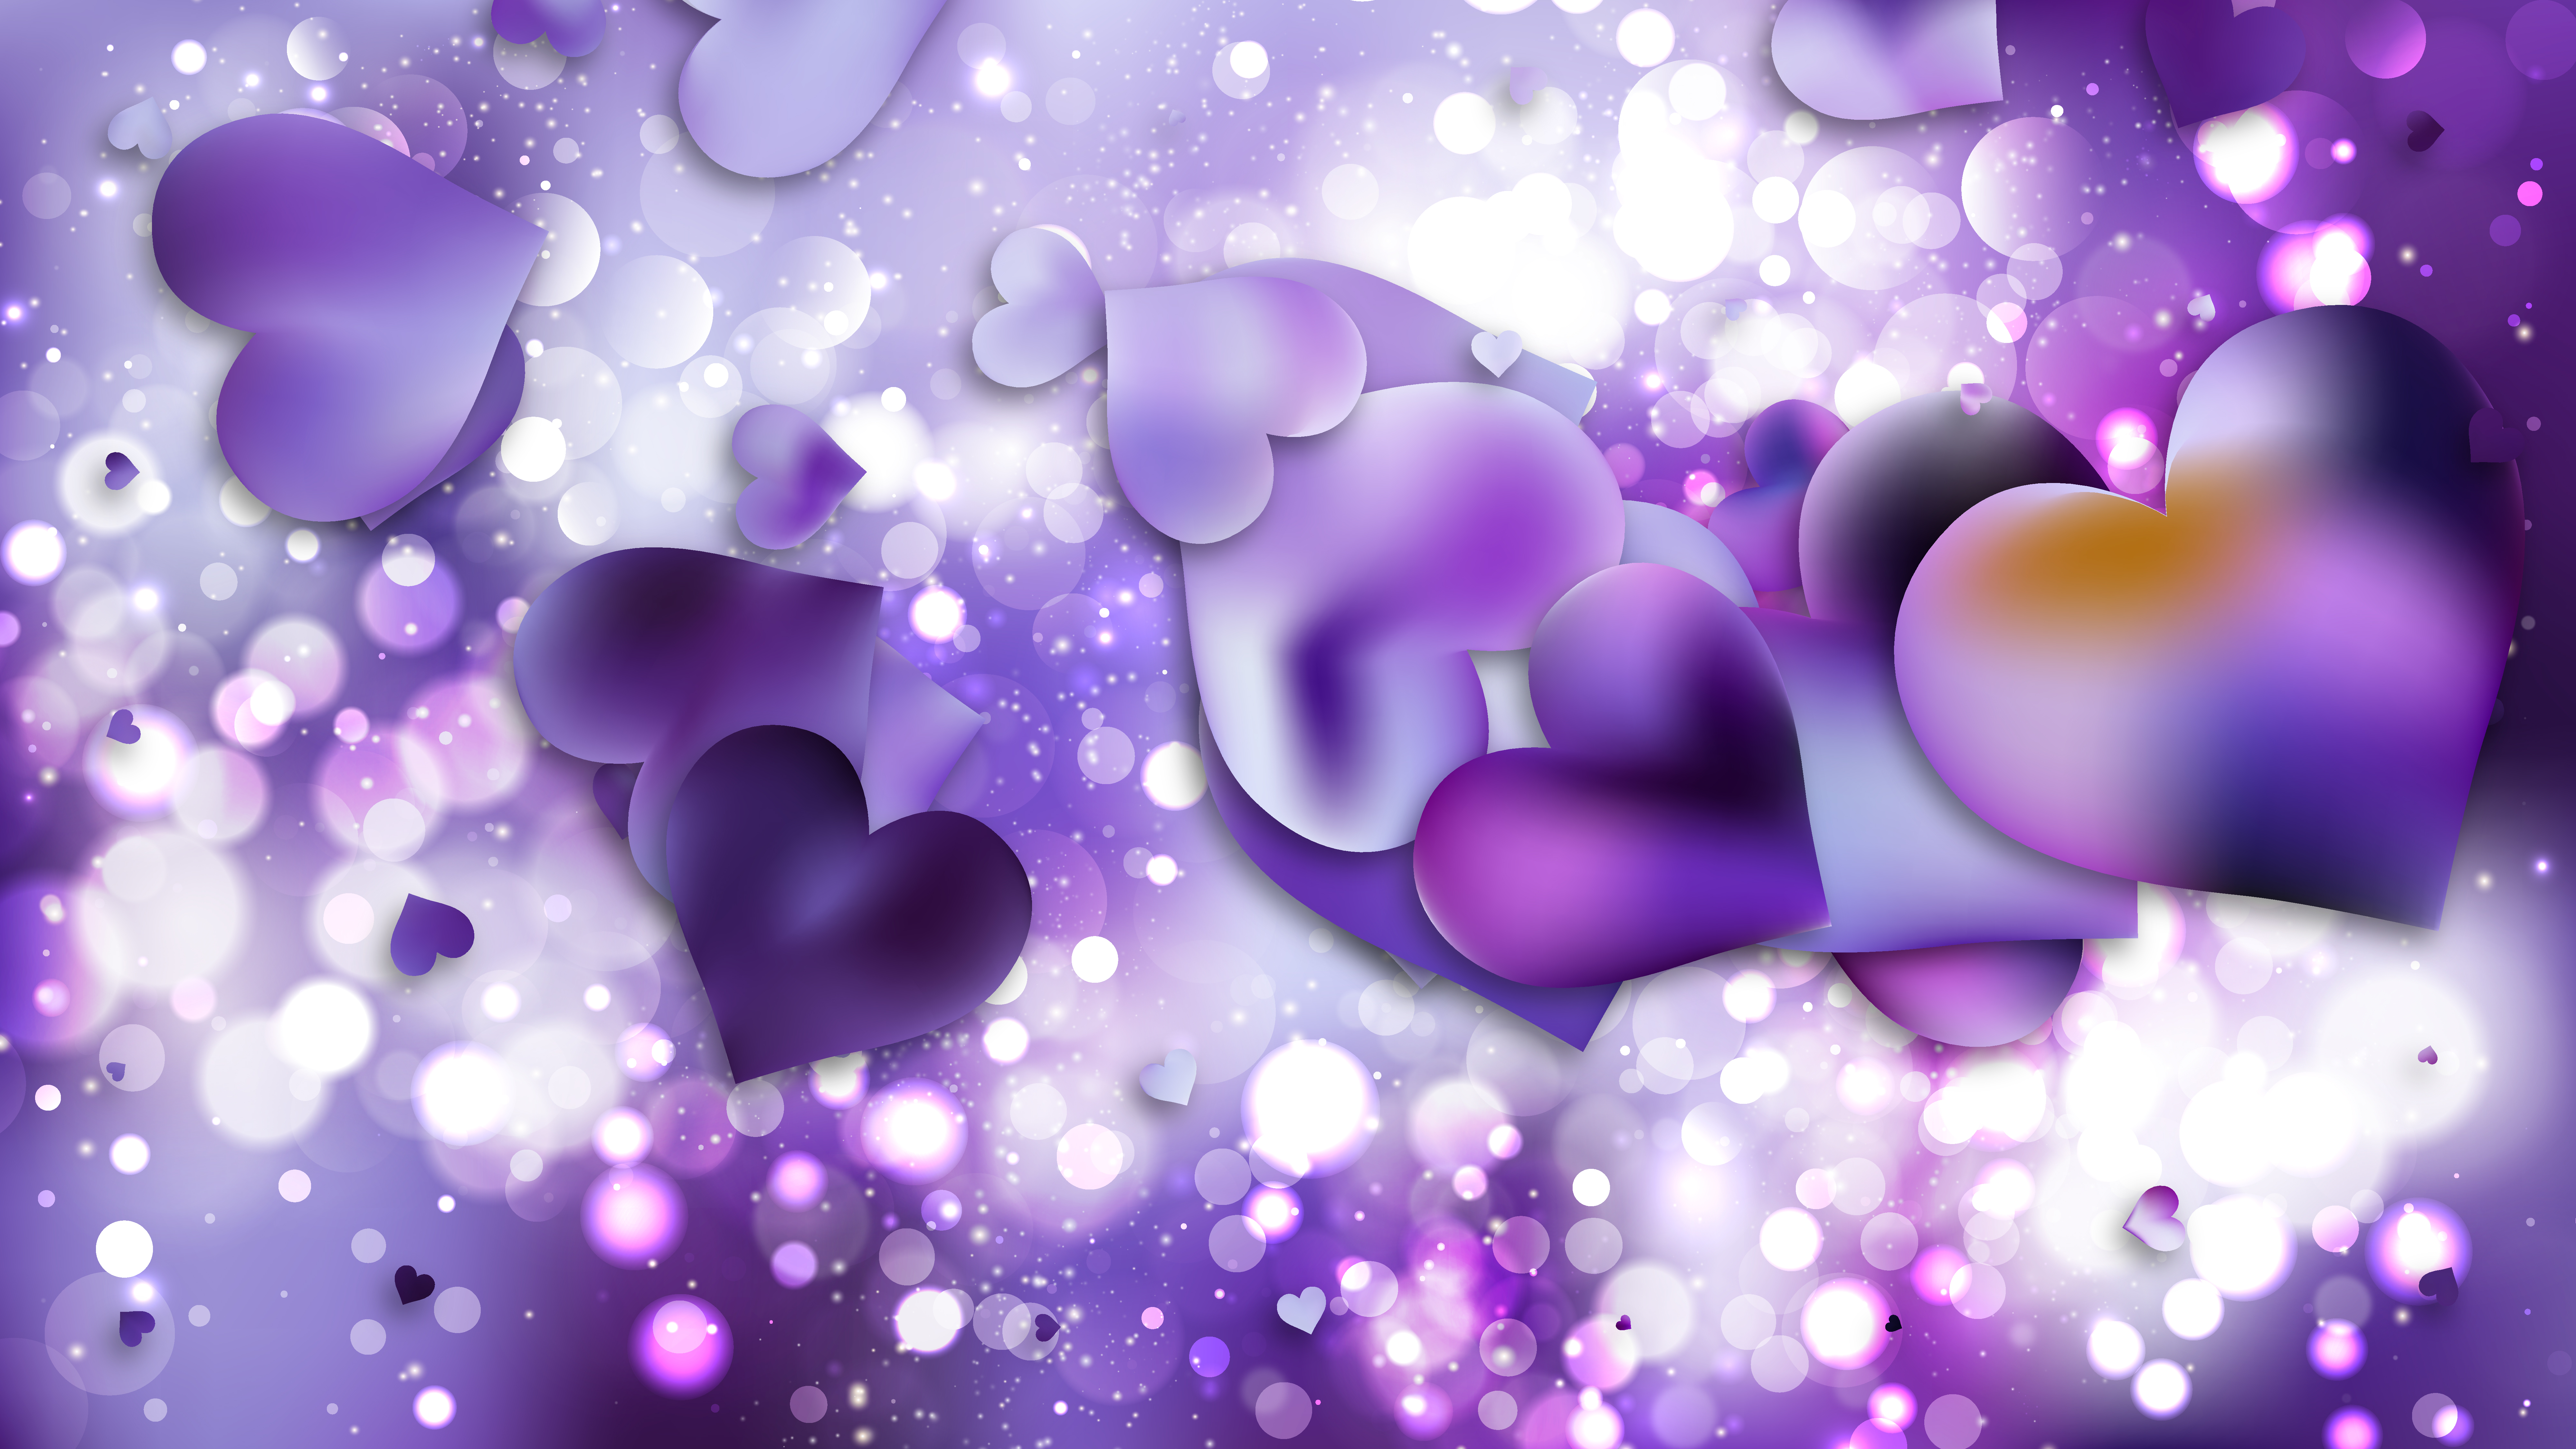 cool purple hearts backgrounds